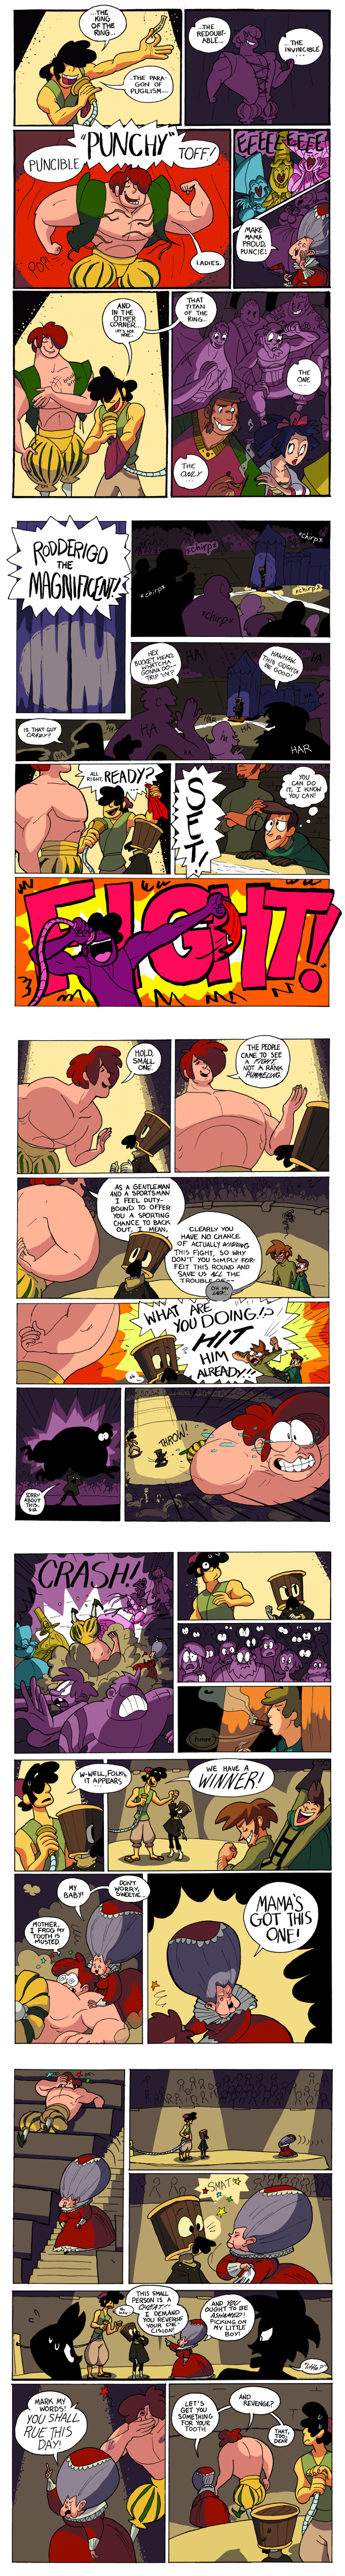 issue4_page16-20